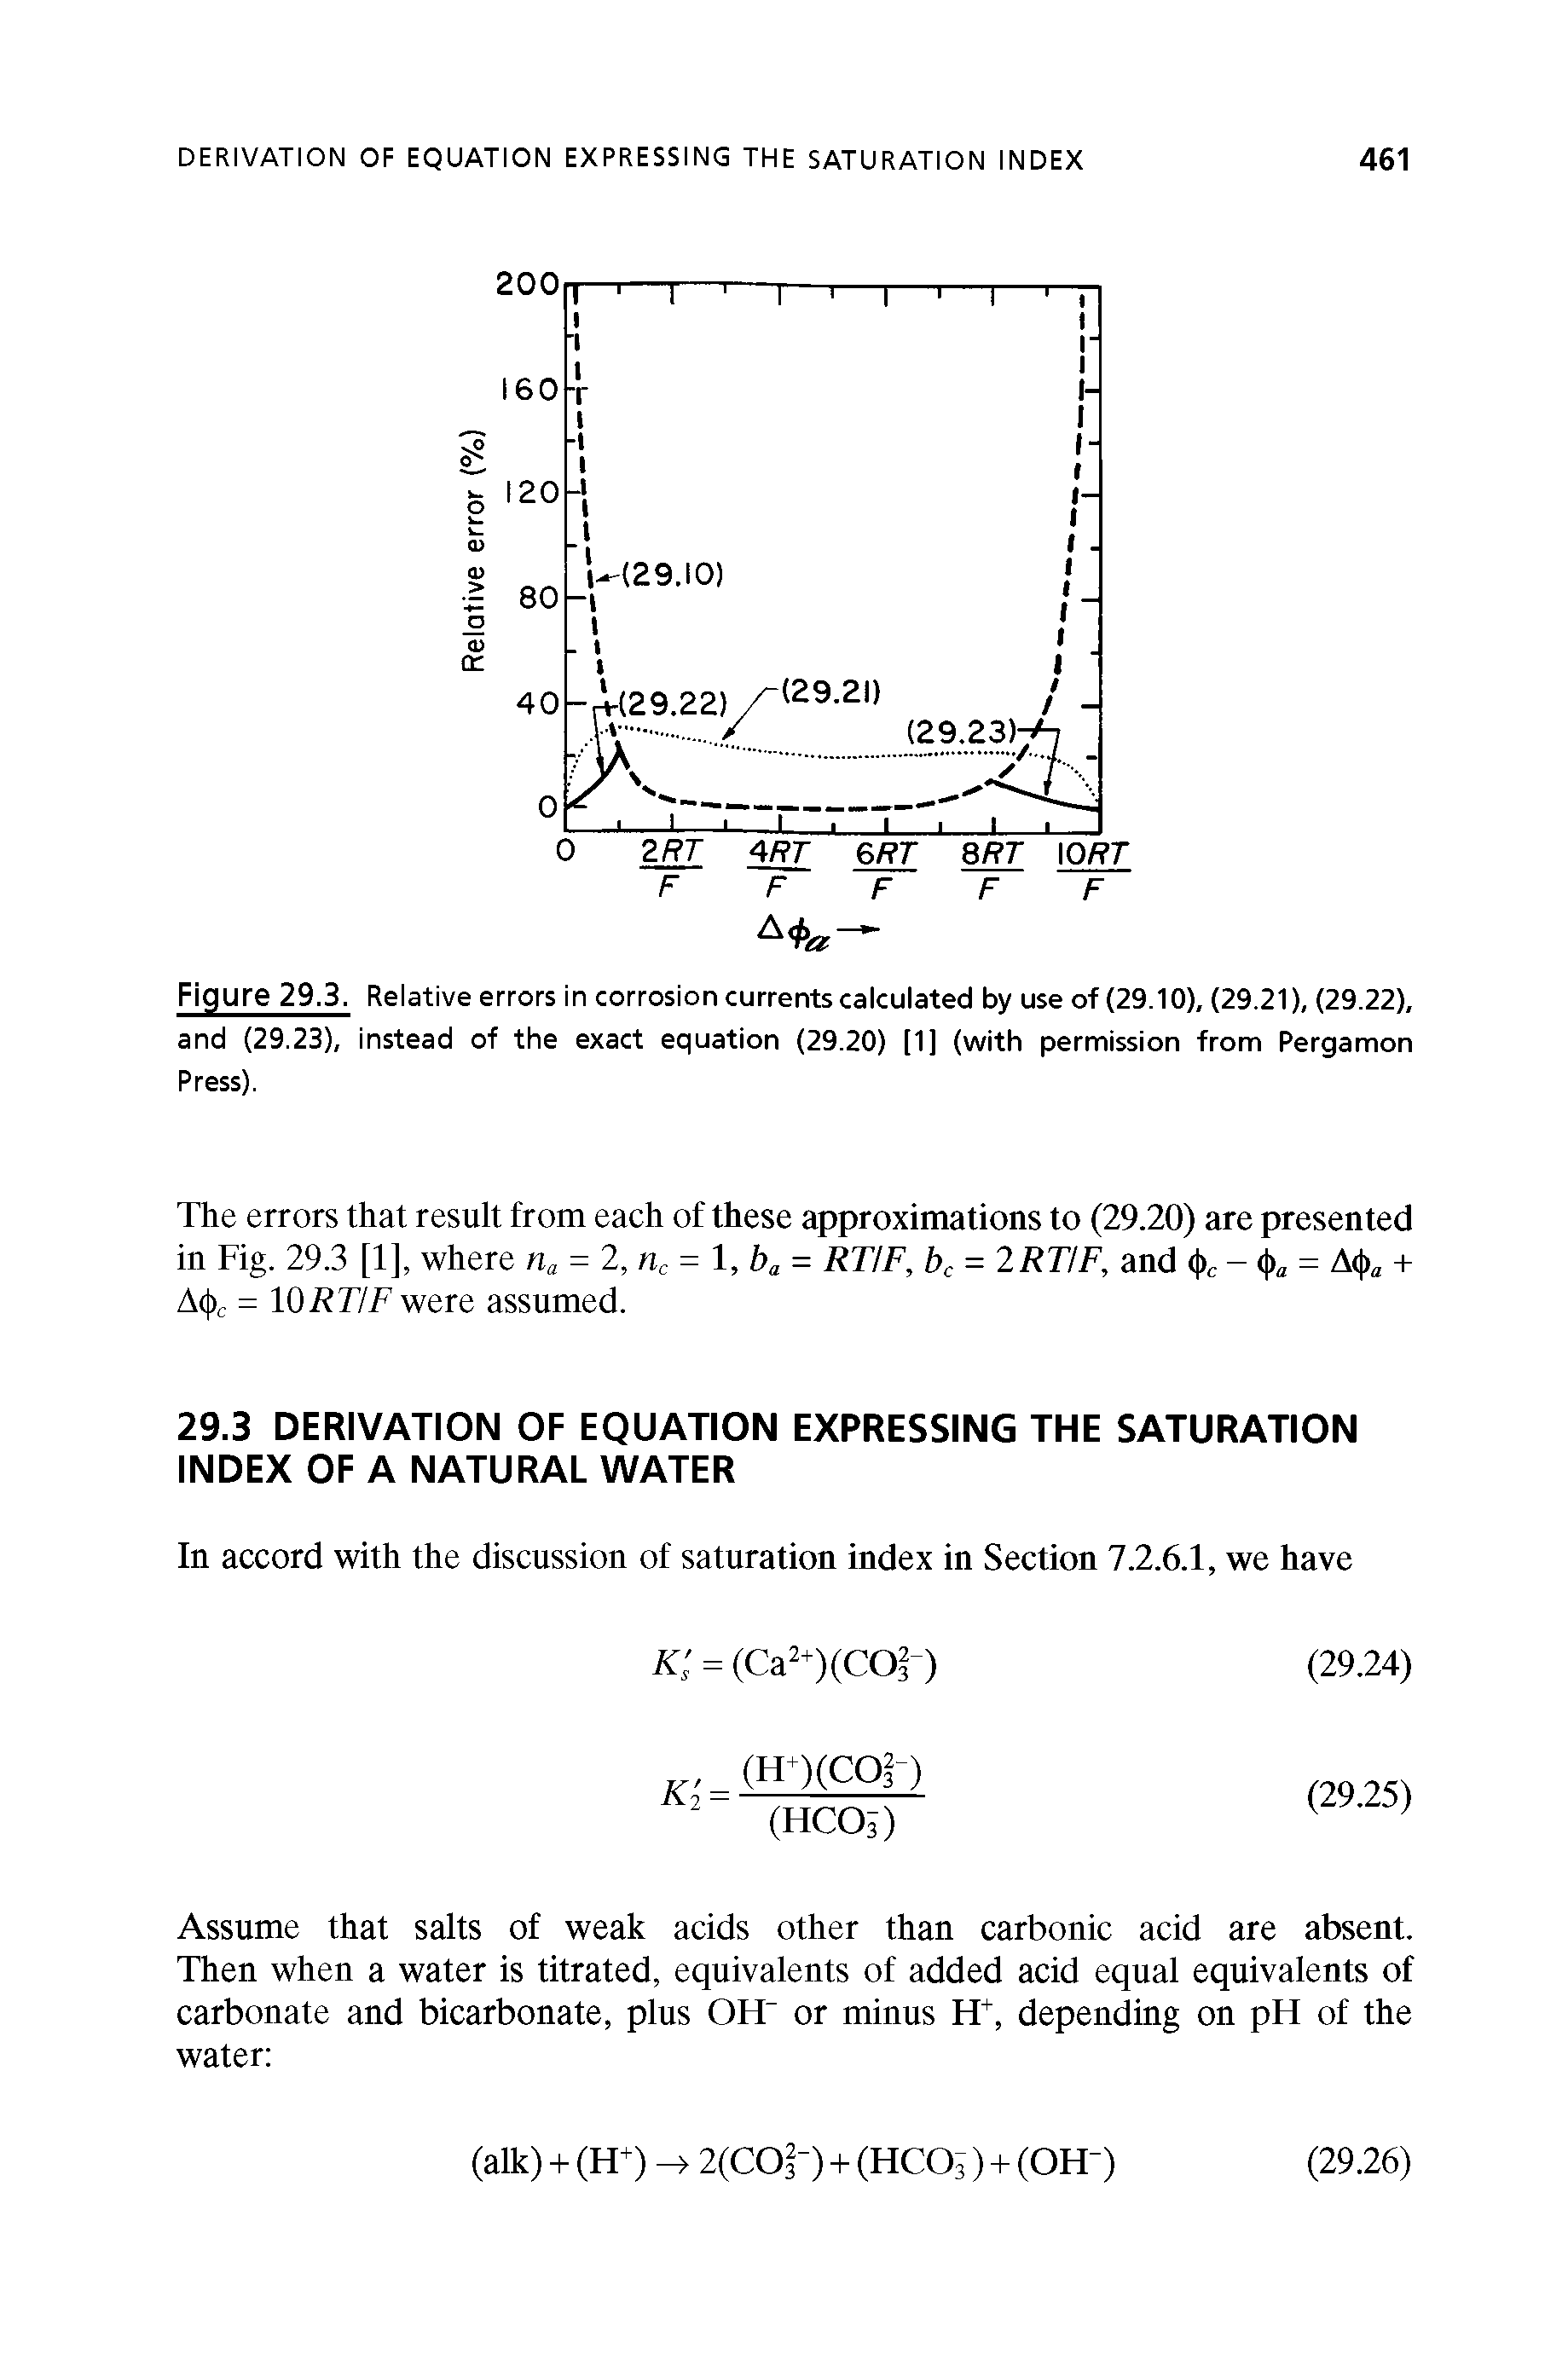 Figure 29.3. Relative errors in corrosion currents calculated by use of (29.10), (29.21), (29.22), and (29.23), instead of the exact equation (29.20) [1] (with permission from Pergamon Press).